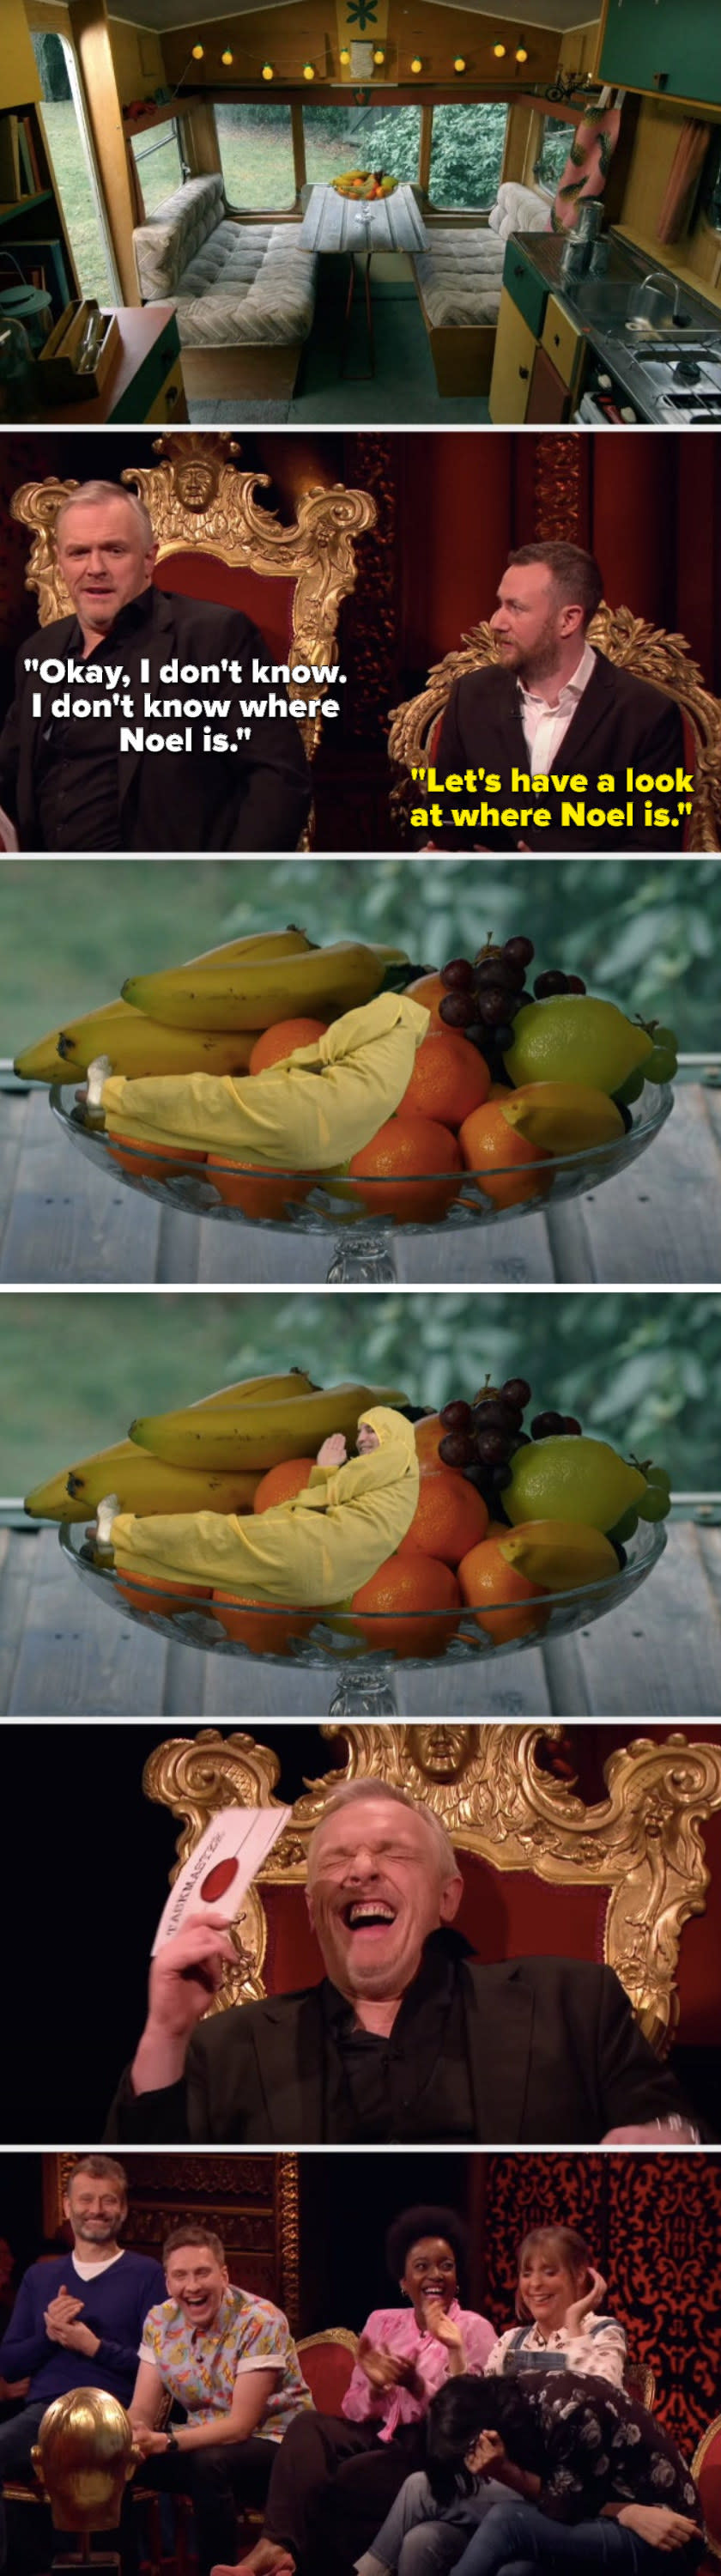 A caravan with no clear Noel, and then Greg says, "Okay, I don't know, I don't know where Noel is," and Alex says, "Let's have a look at where Noel is," and we see Noel Fielding has been photoshopped into a fruit bowl and everyone laughs